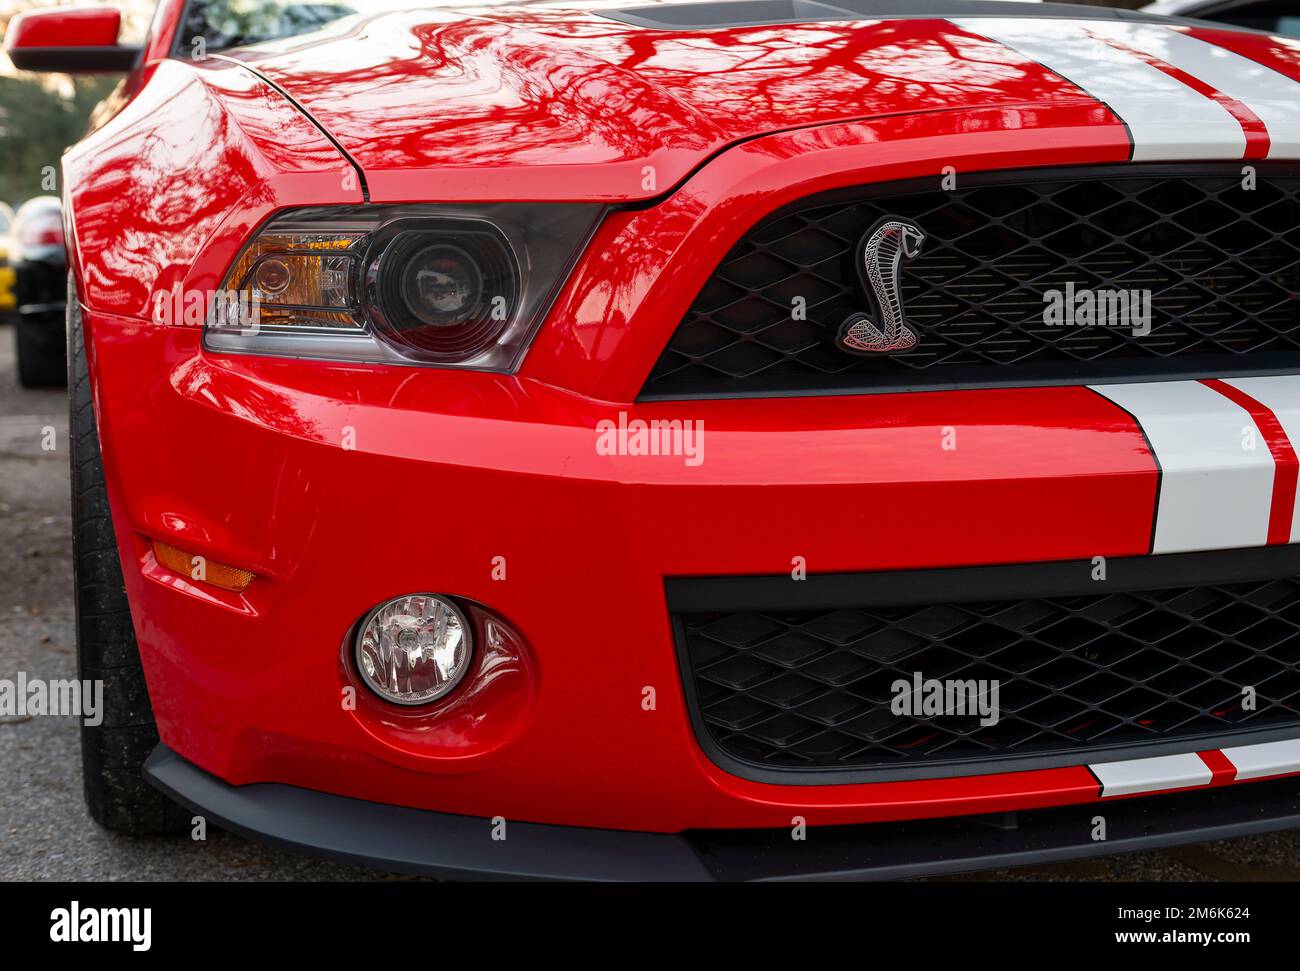 Front hood and grill of a red Ford Carol Shelby GT500 muscle car with the Cobra emblem on the grill. Stock Photo